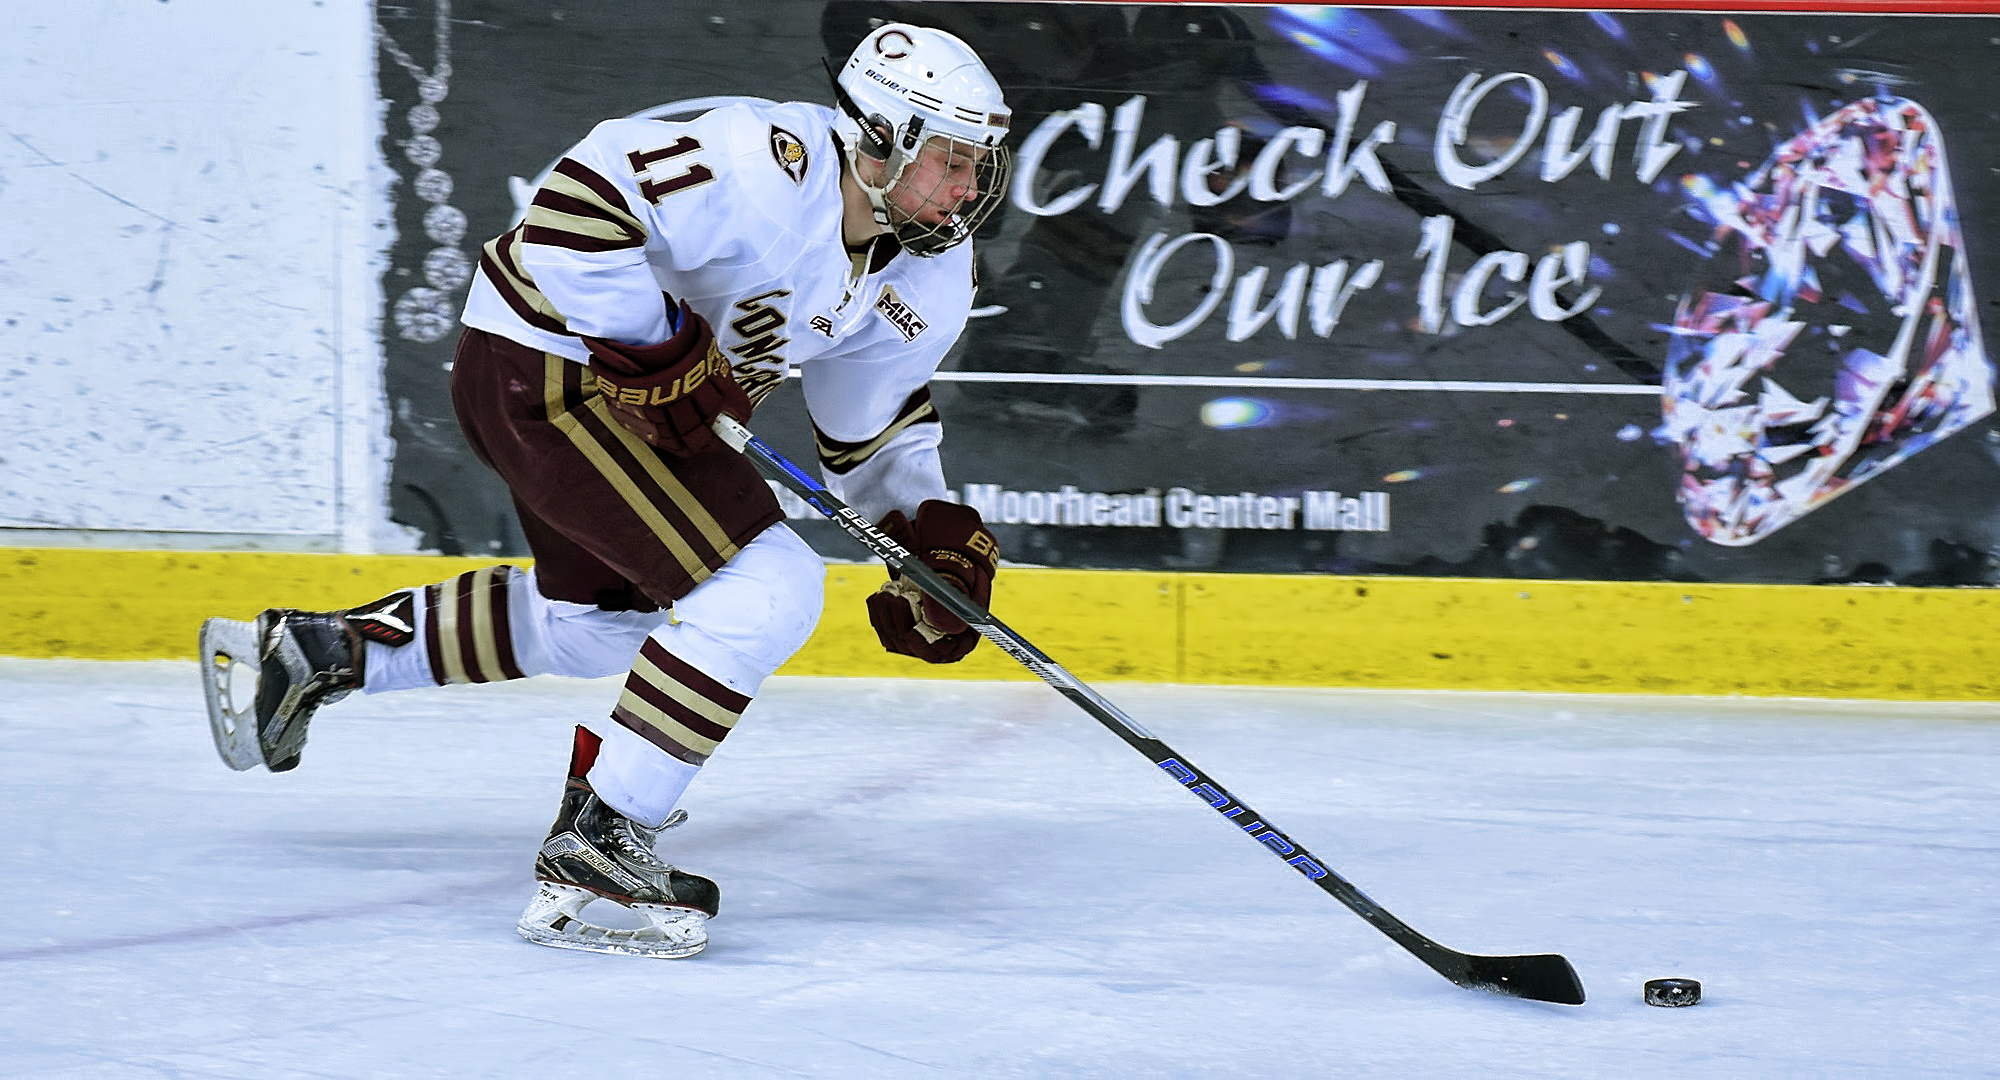 Freshman Jacen Bracko scored a pair of goals in the Cobbers' series finale at St. Thomas.